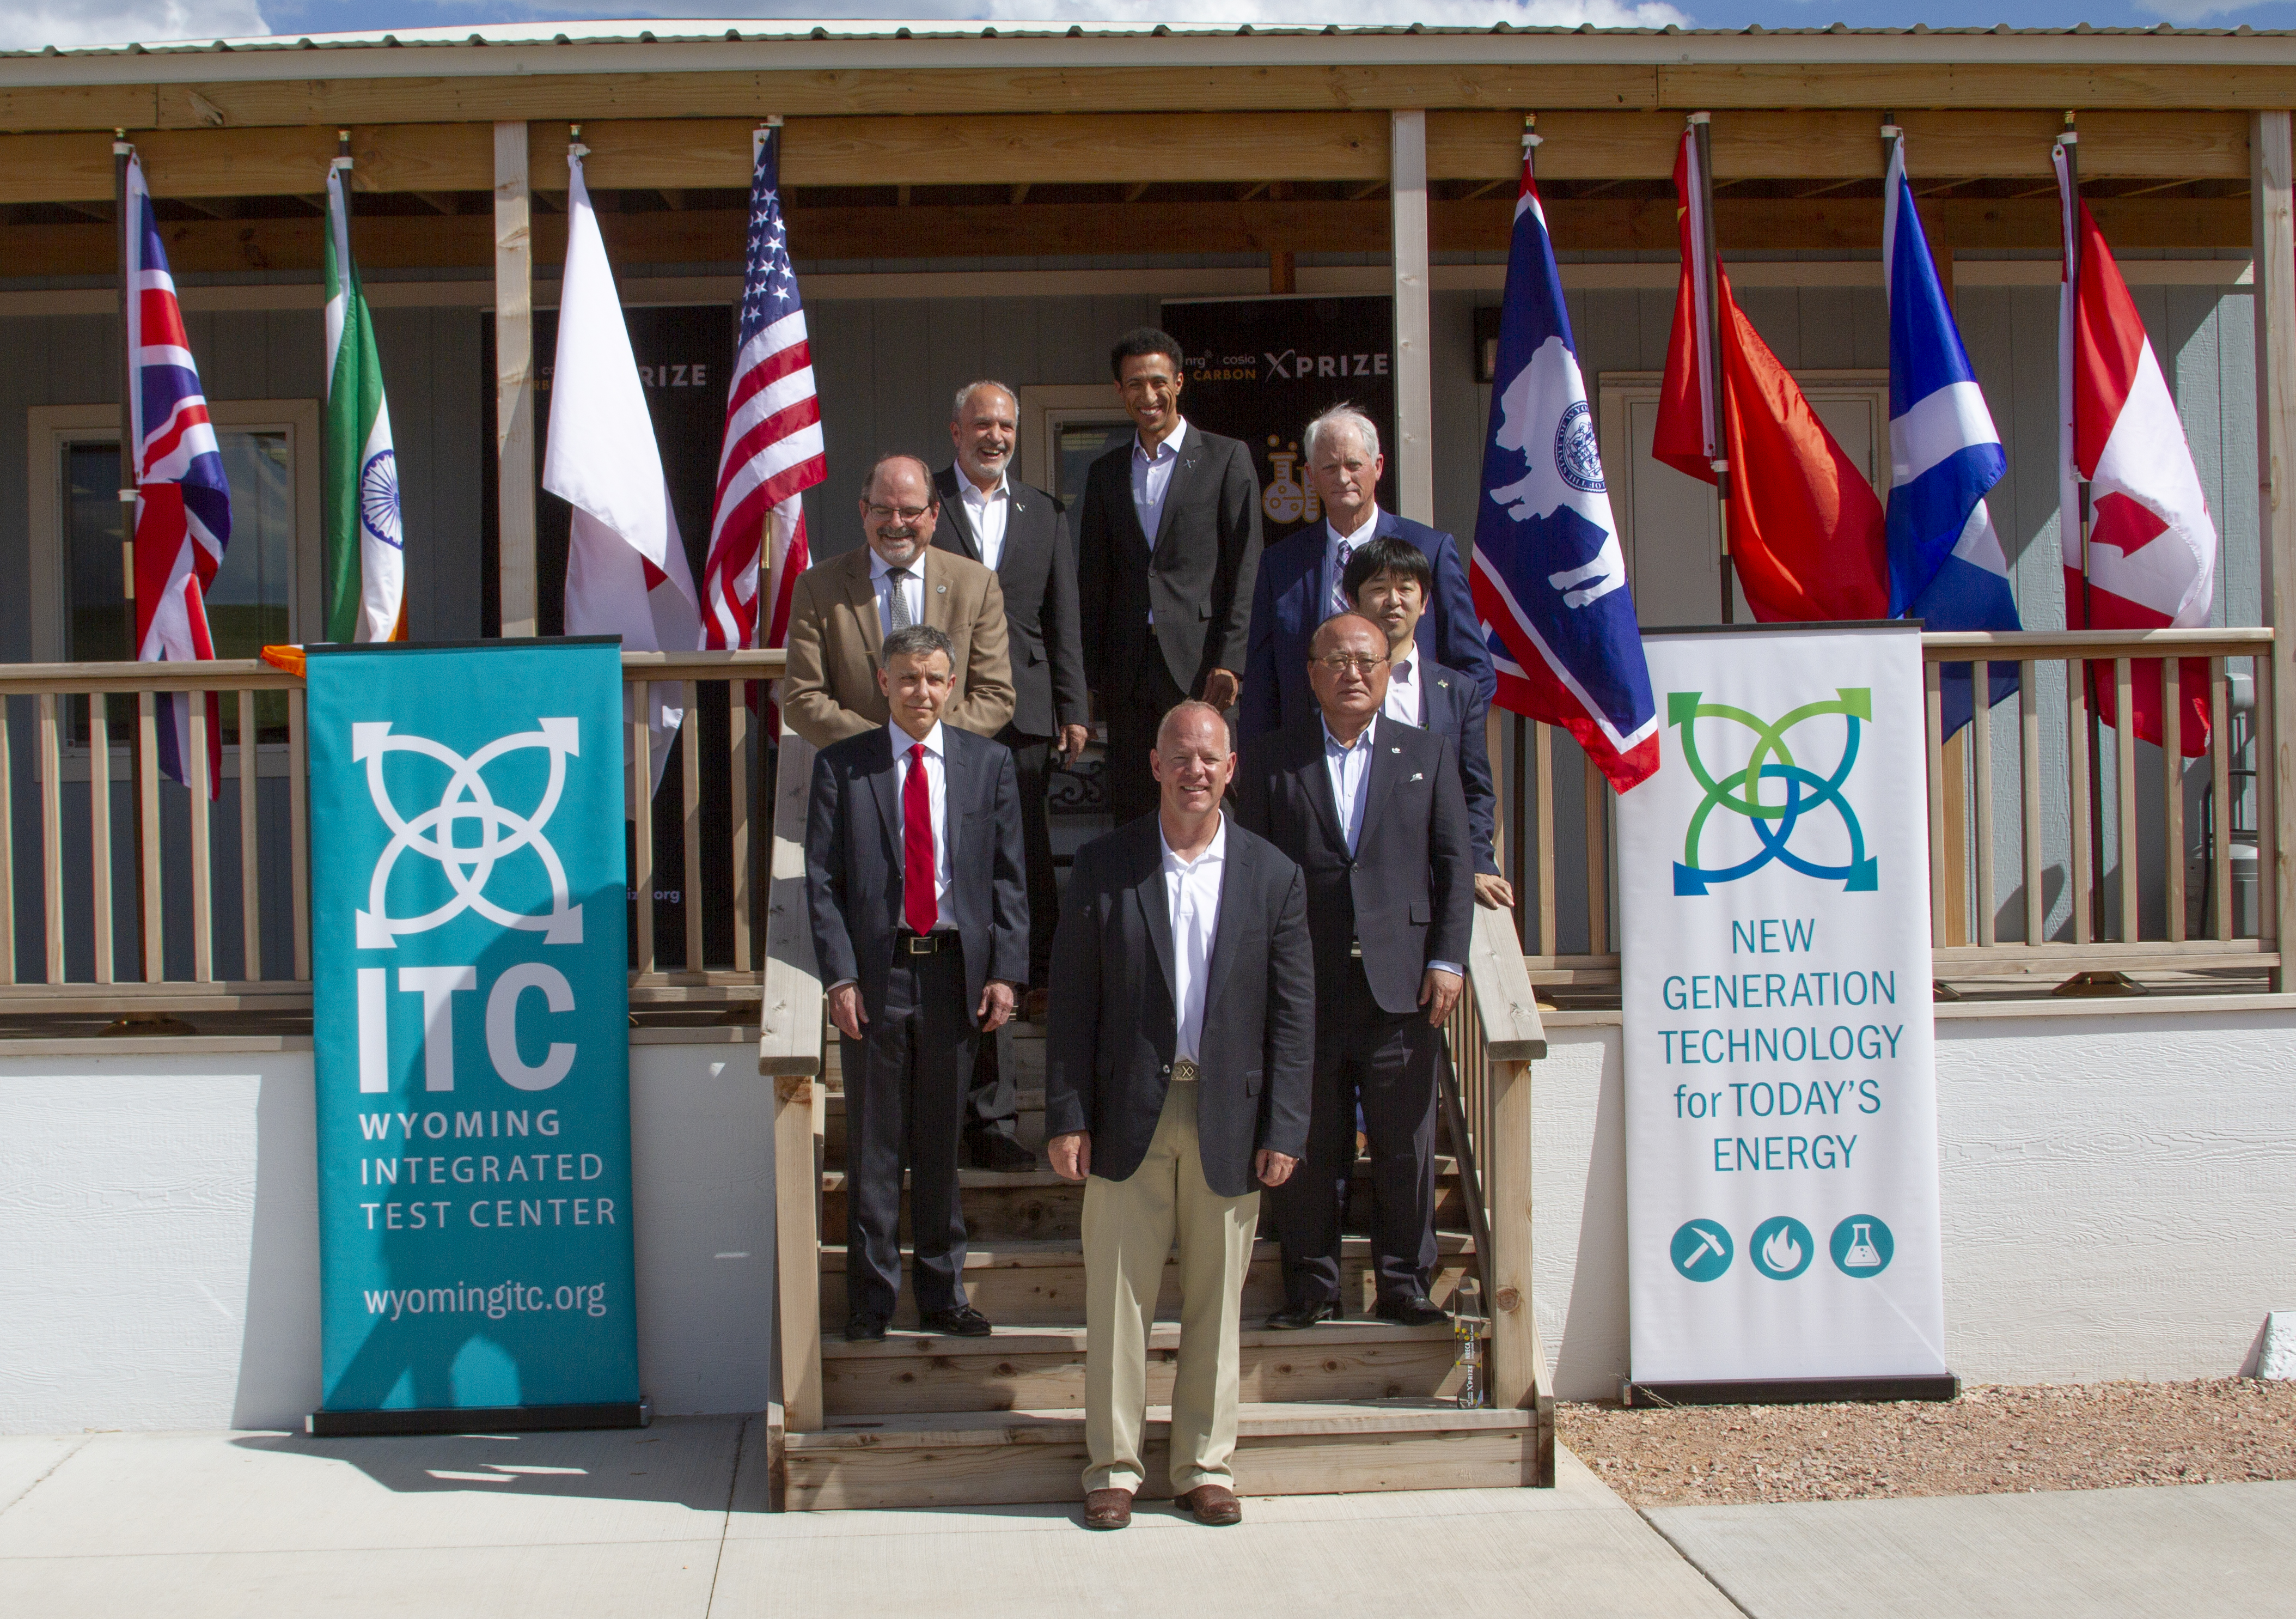 Wyoming Gov. Matt Mead (center) joined electric cooperative and XPRIZE leaders and Japanese coal and industrial officials for the dedication of the ITC in Gillette, Wyoming on May 16. (Photo By: Ryan Hall/Rural Montana) 